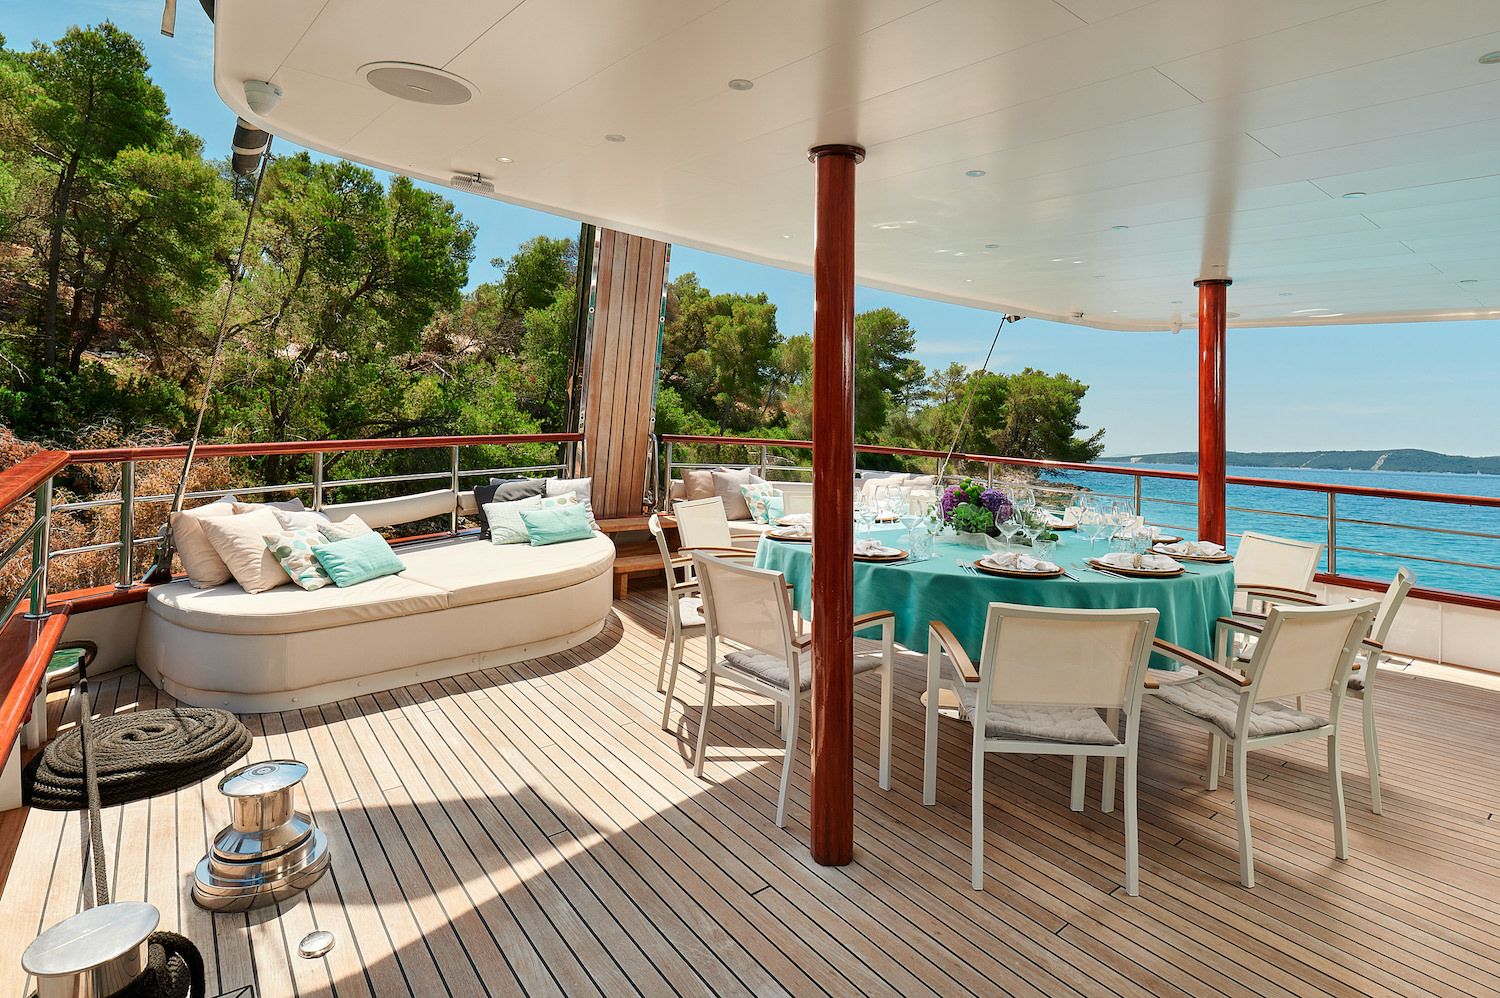 Aft Deck Lounging And Dining